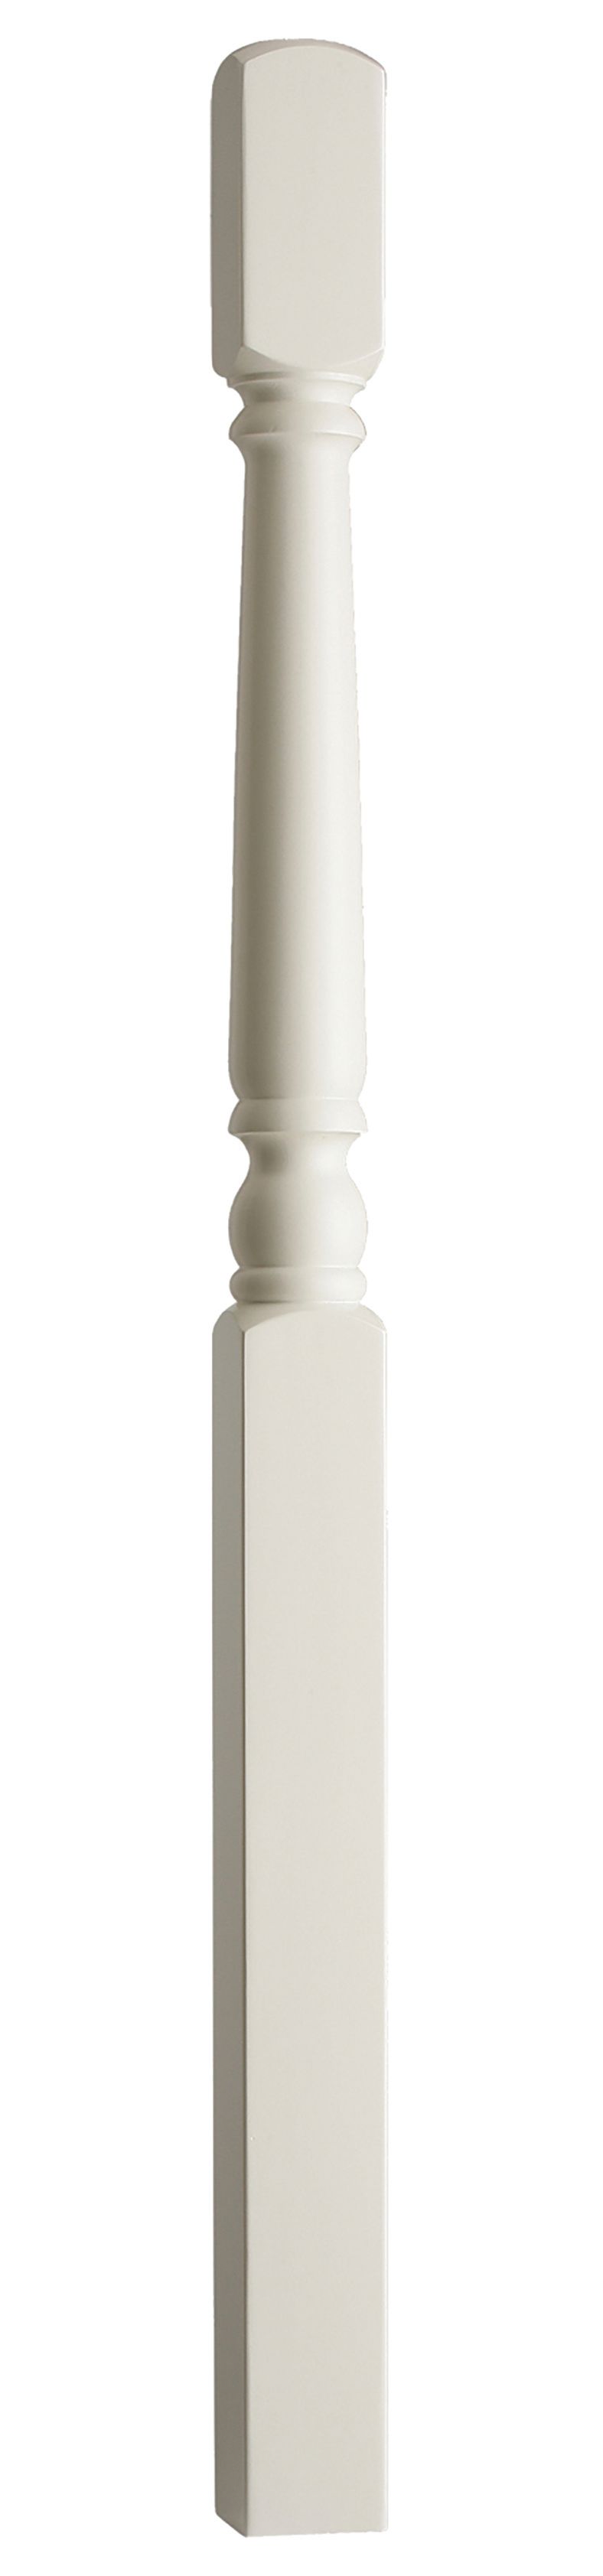 Image of Wickes Primed Turned Newel 1500 x 90 x 90mm